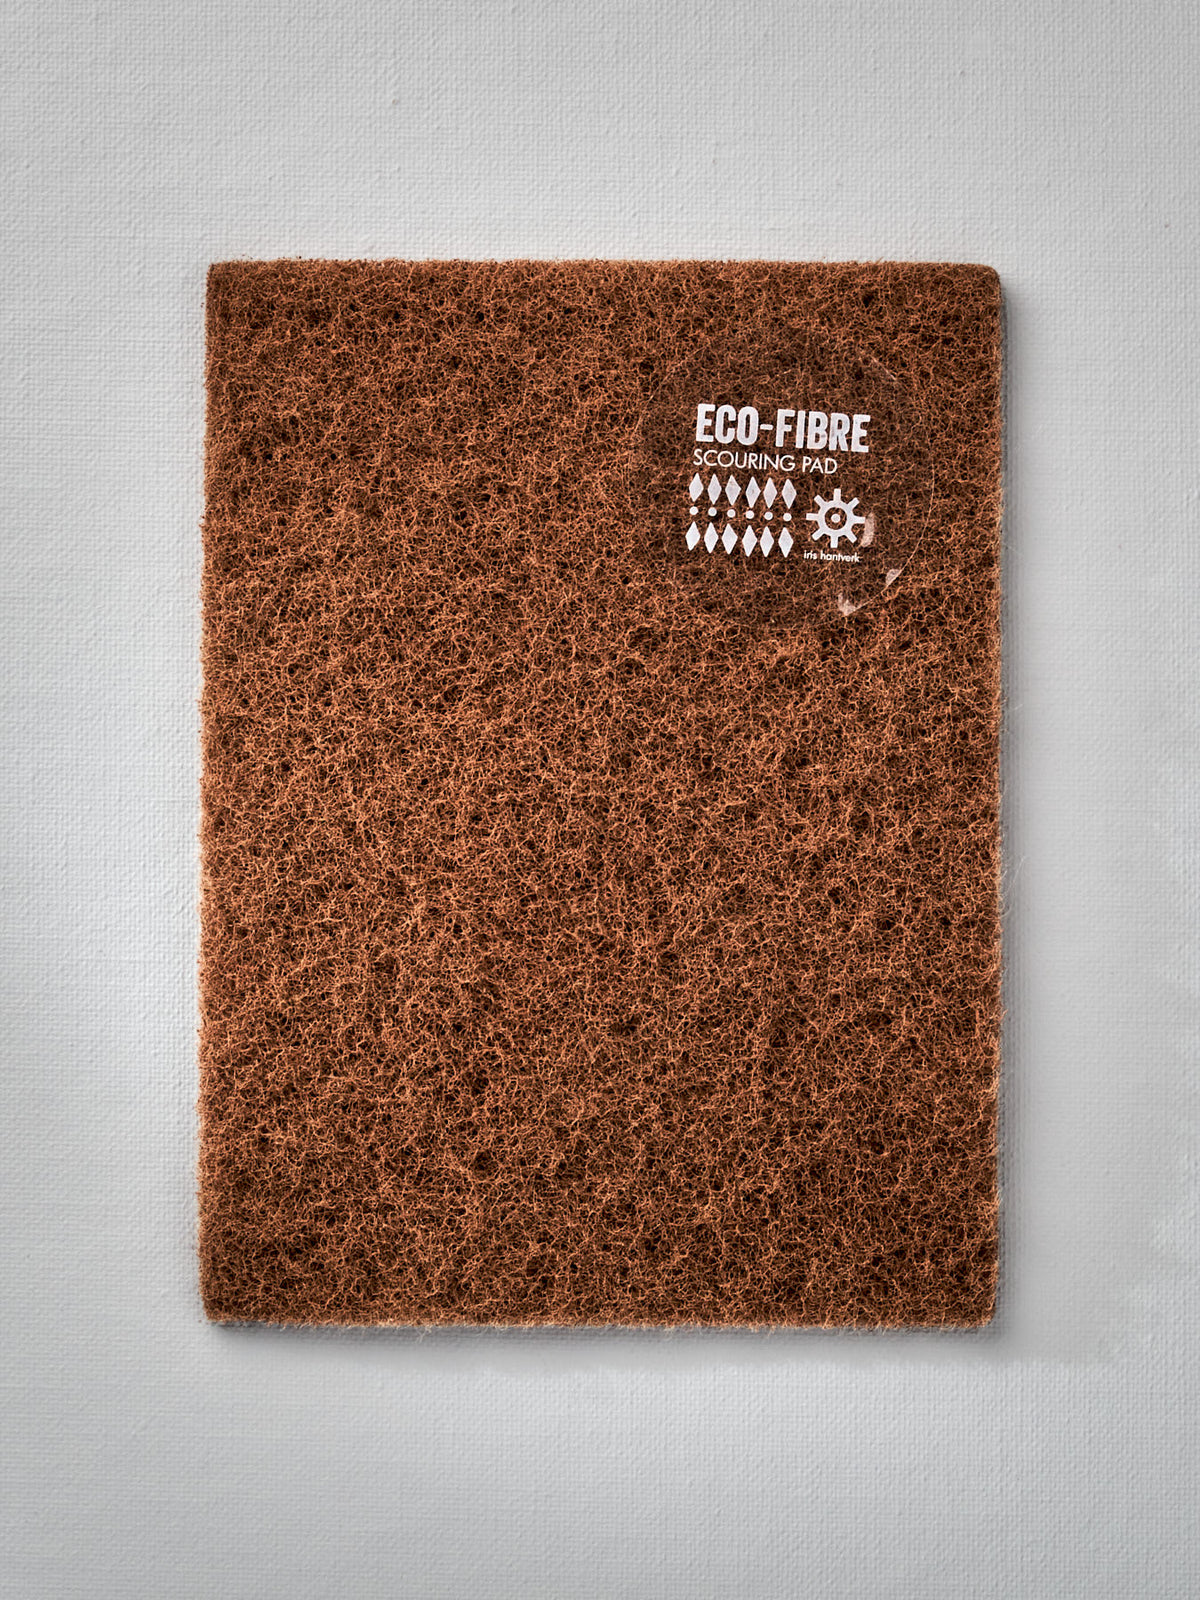 A brown Eco-Fibre Scouring Pad with the brand name Iris Hantverk on it.